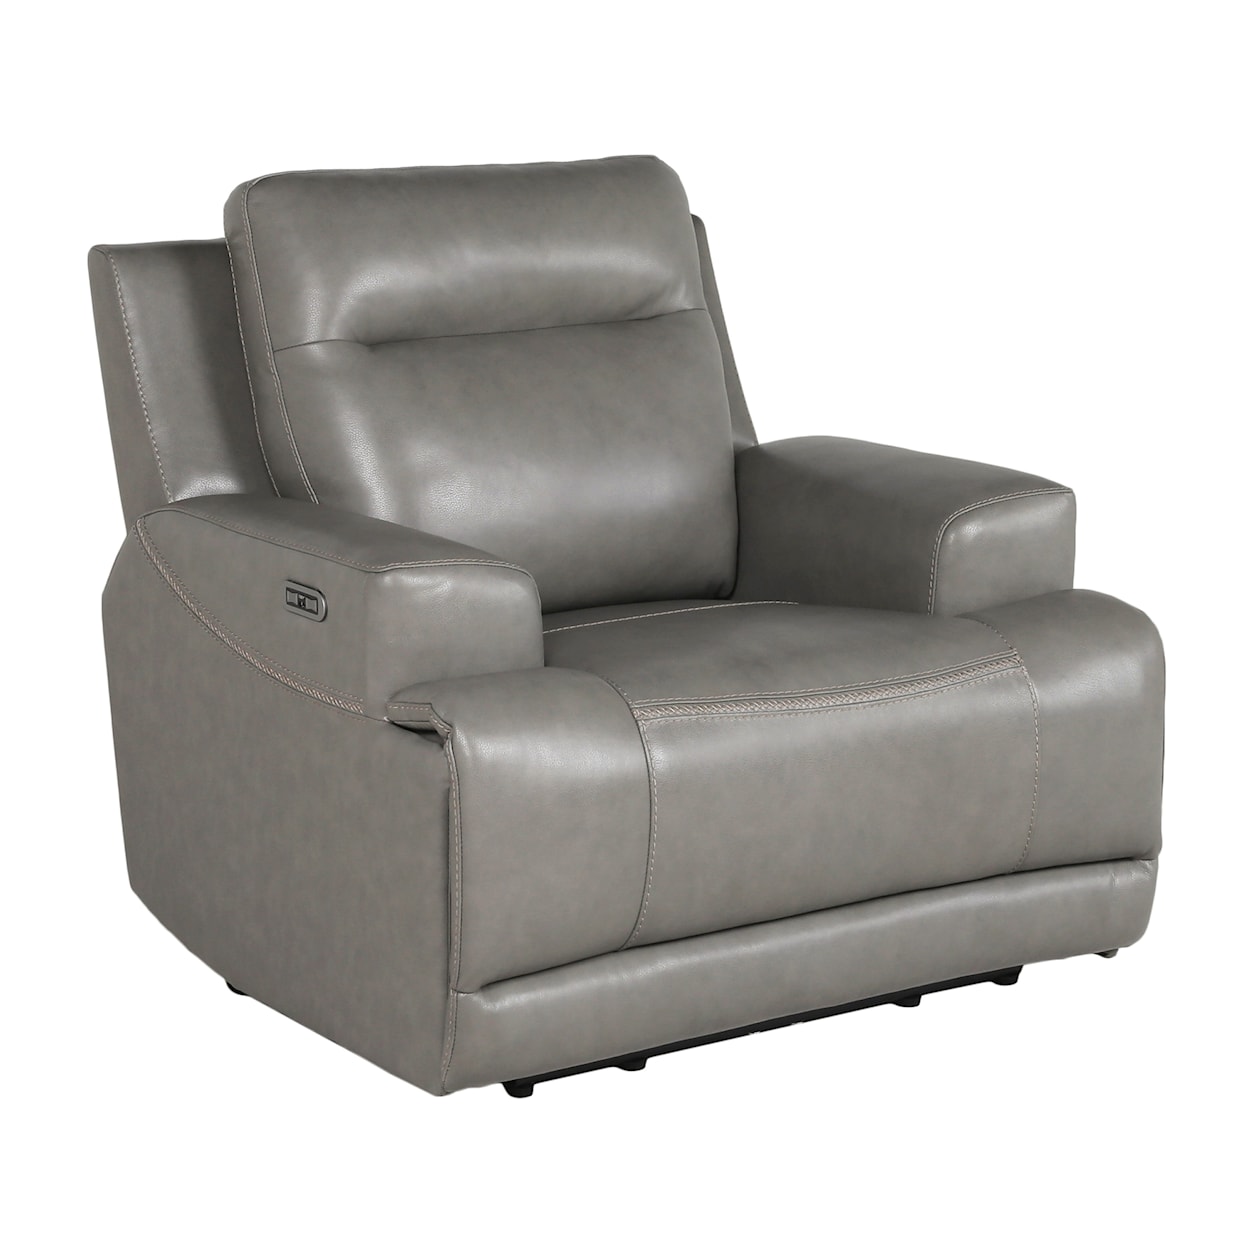 Signature Design by Ashley Goal Keeper Power Recliner